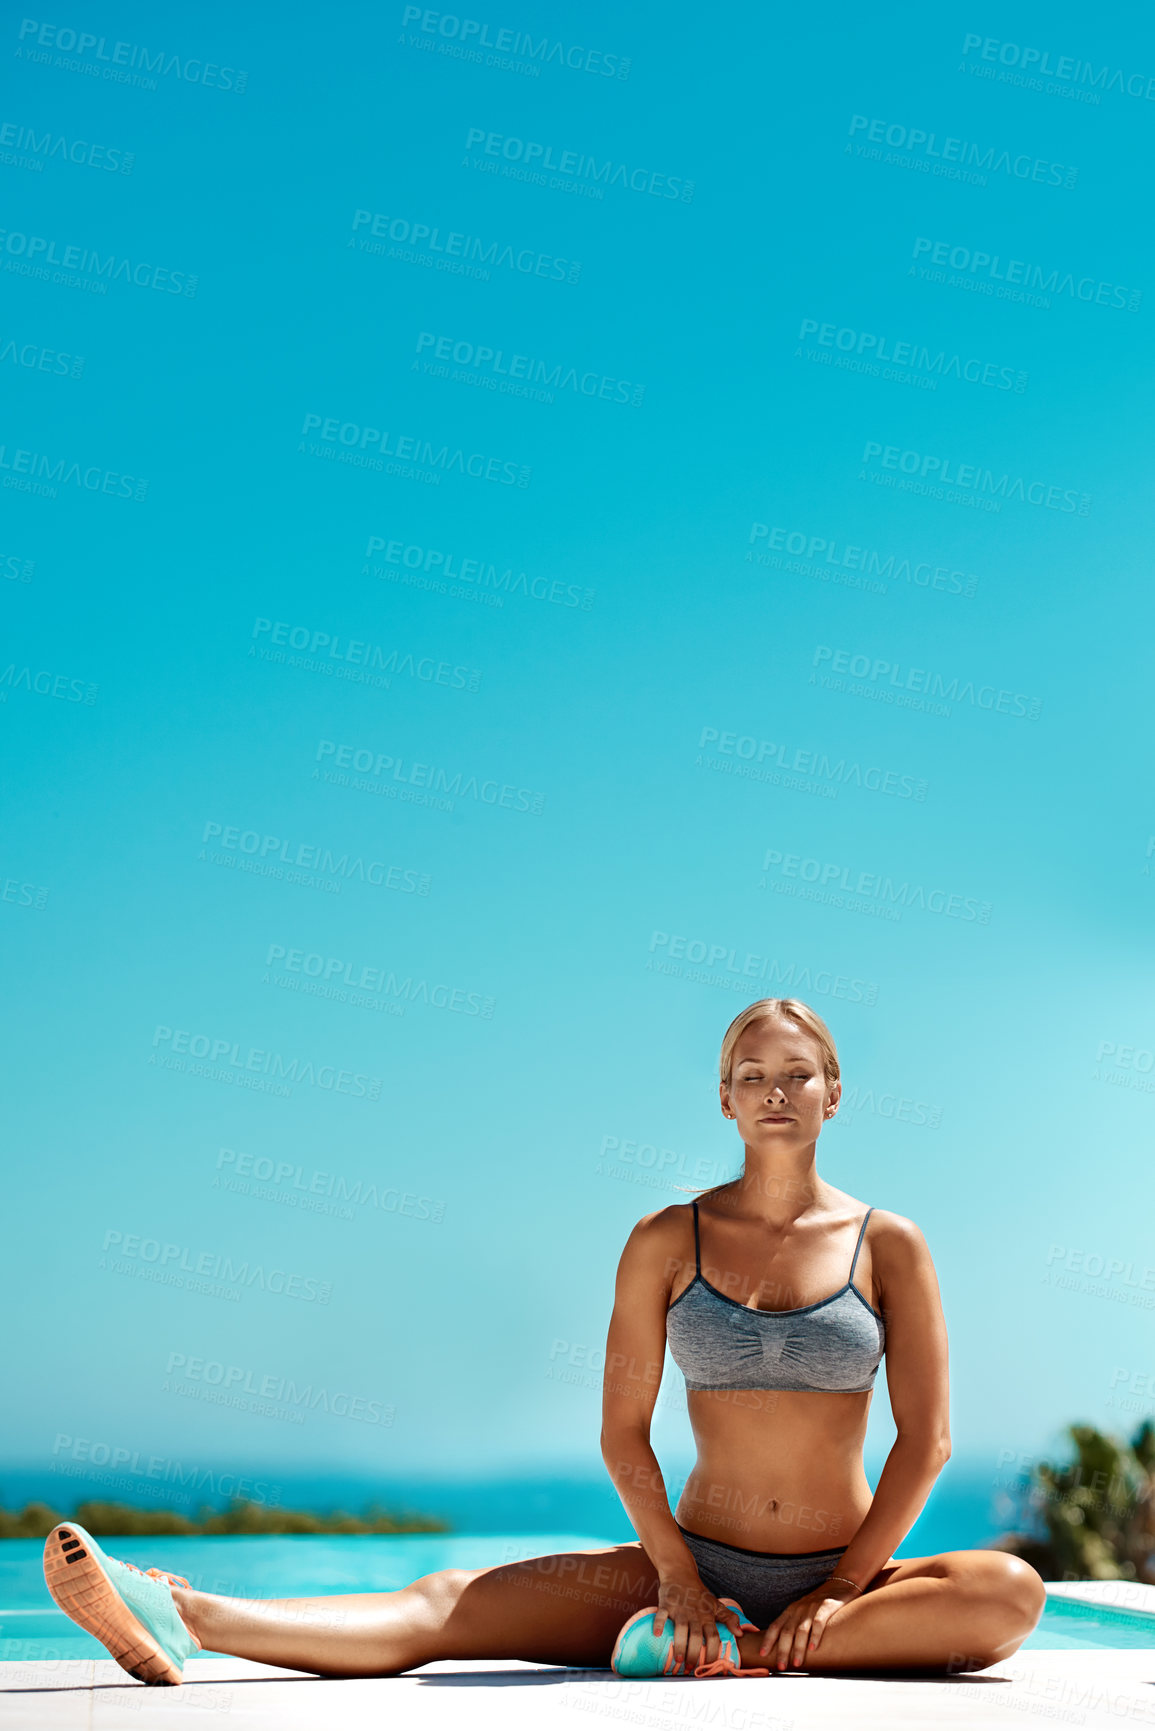 Buy stock photo Shot of a young attractive woman in workout gear stretching her legs after her workout by the pool